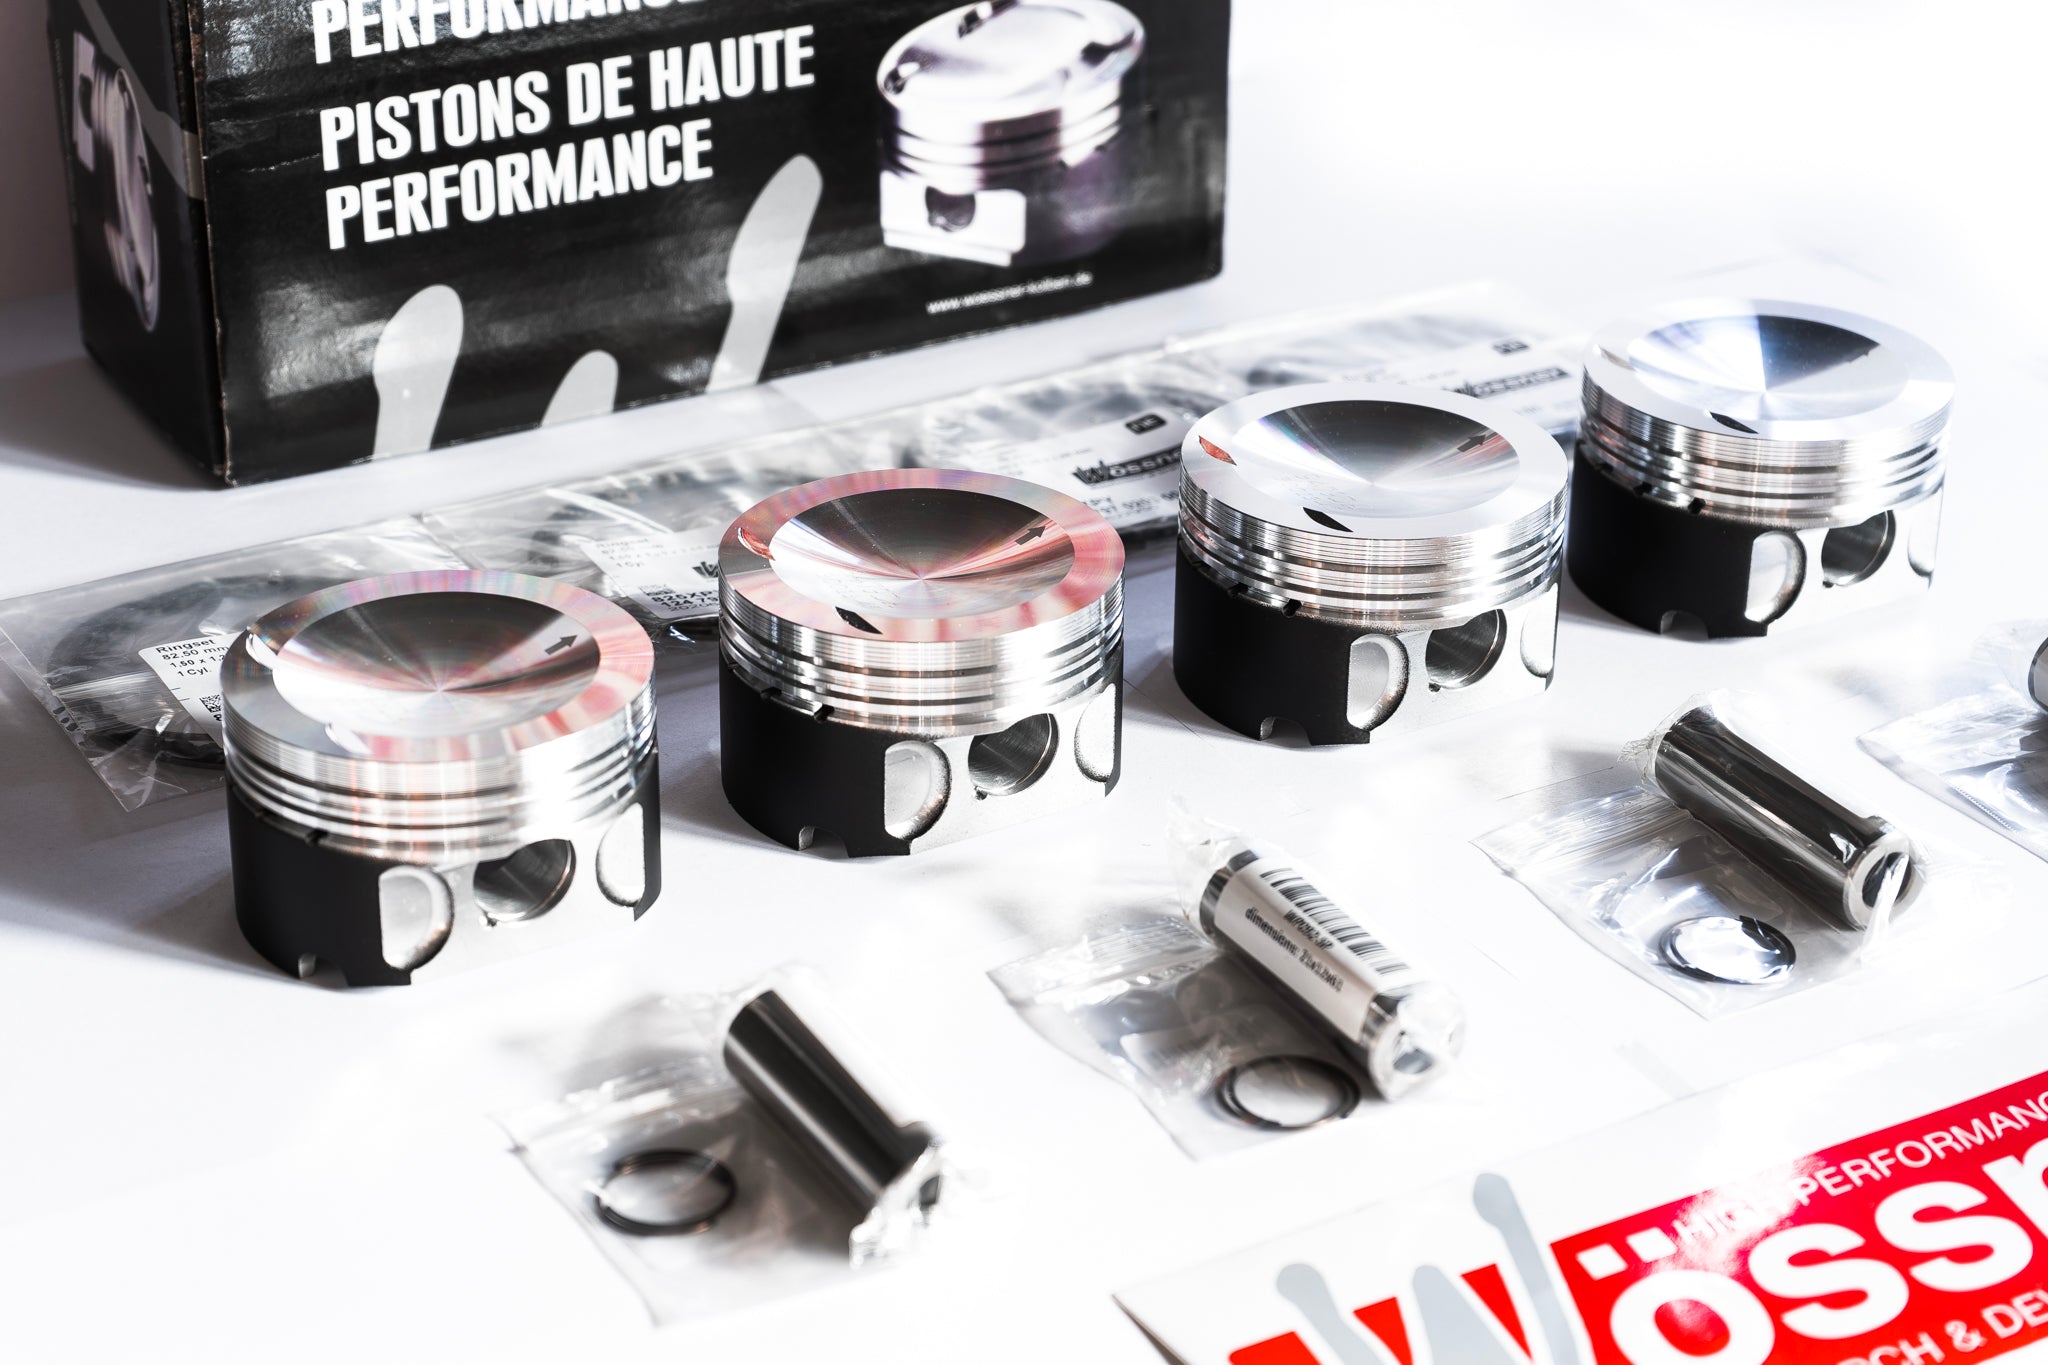 Wossner Forged Pistons for 2.0 TFSI EA113 & 2.0 TSI EA888 - RTMG Performance